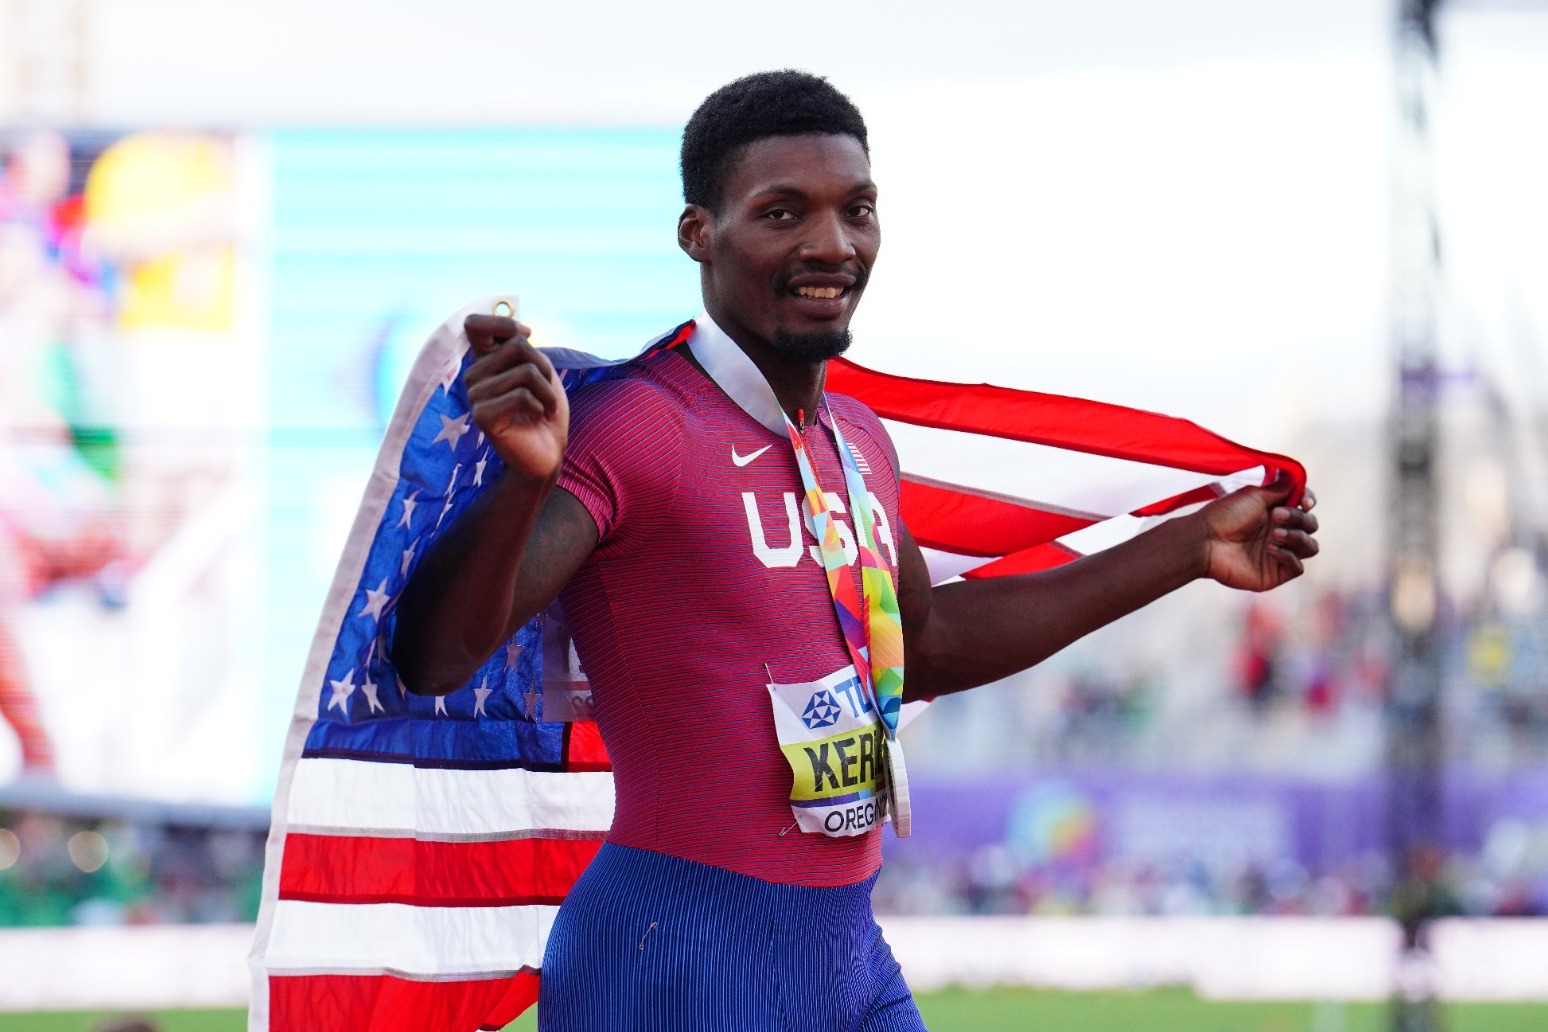 Fred Kerley crowned 100m world champion as US secures clean sweep in Eugene 